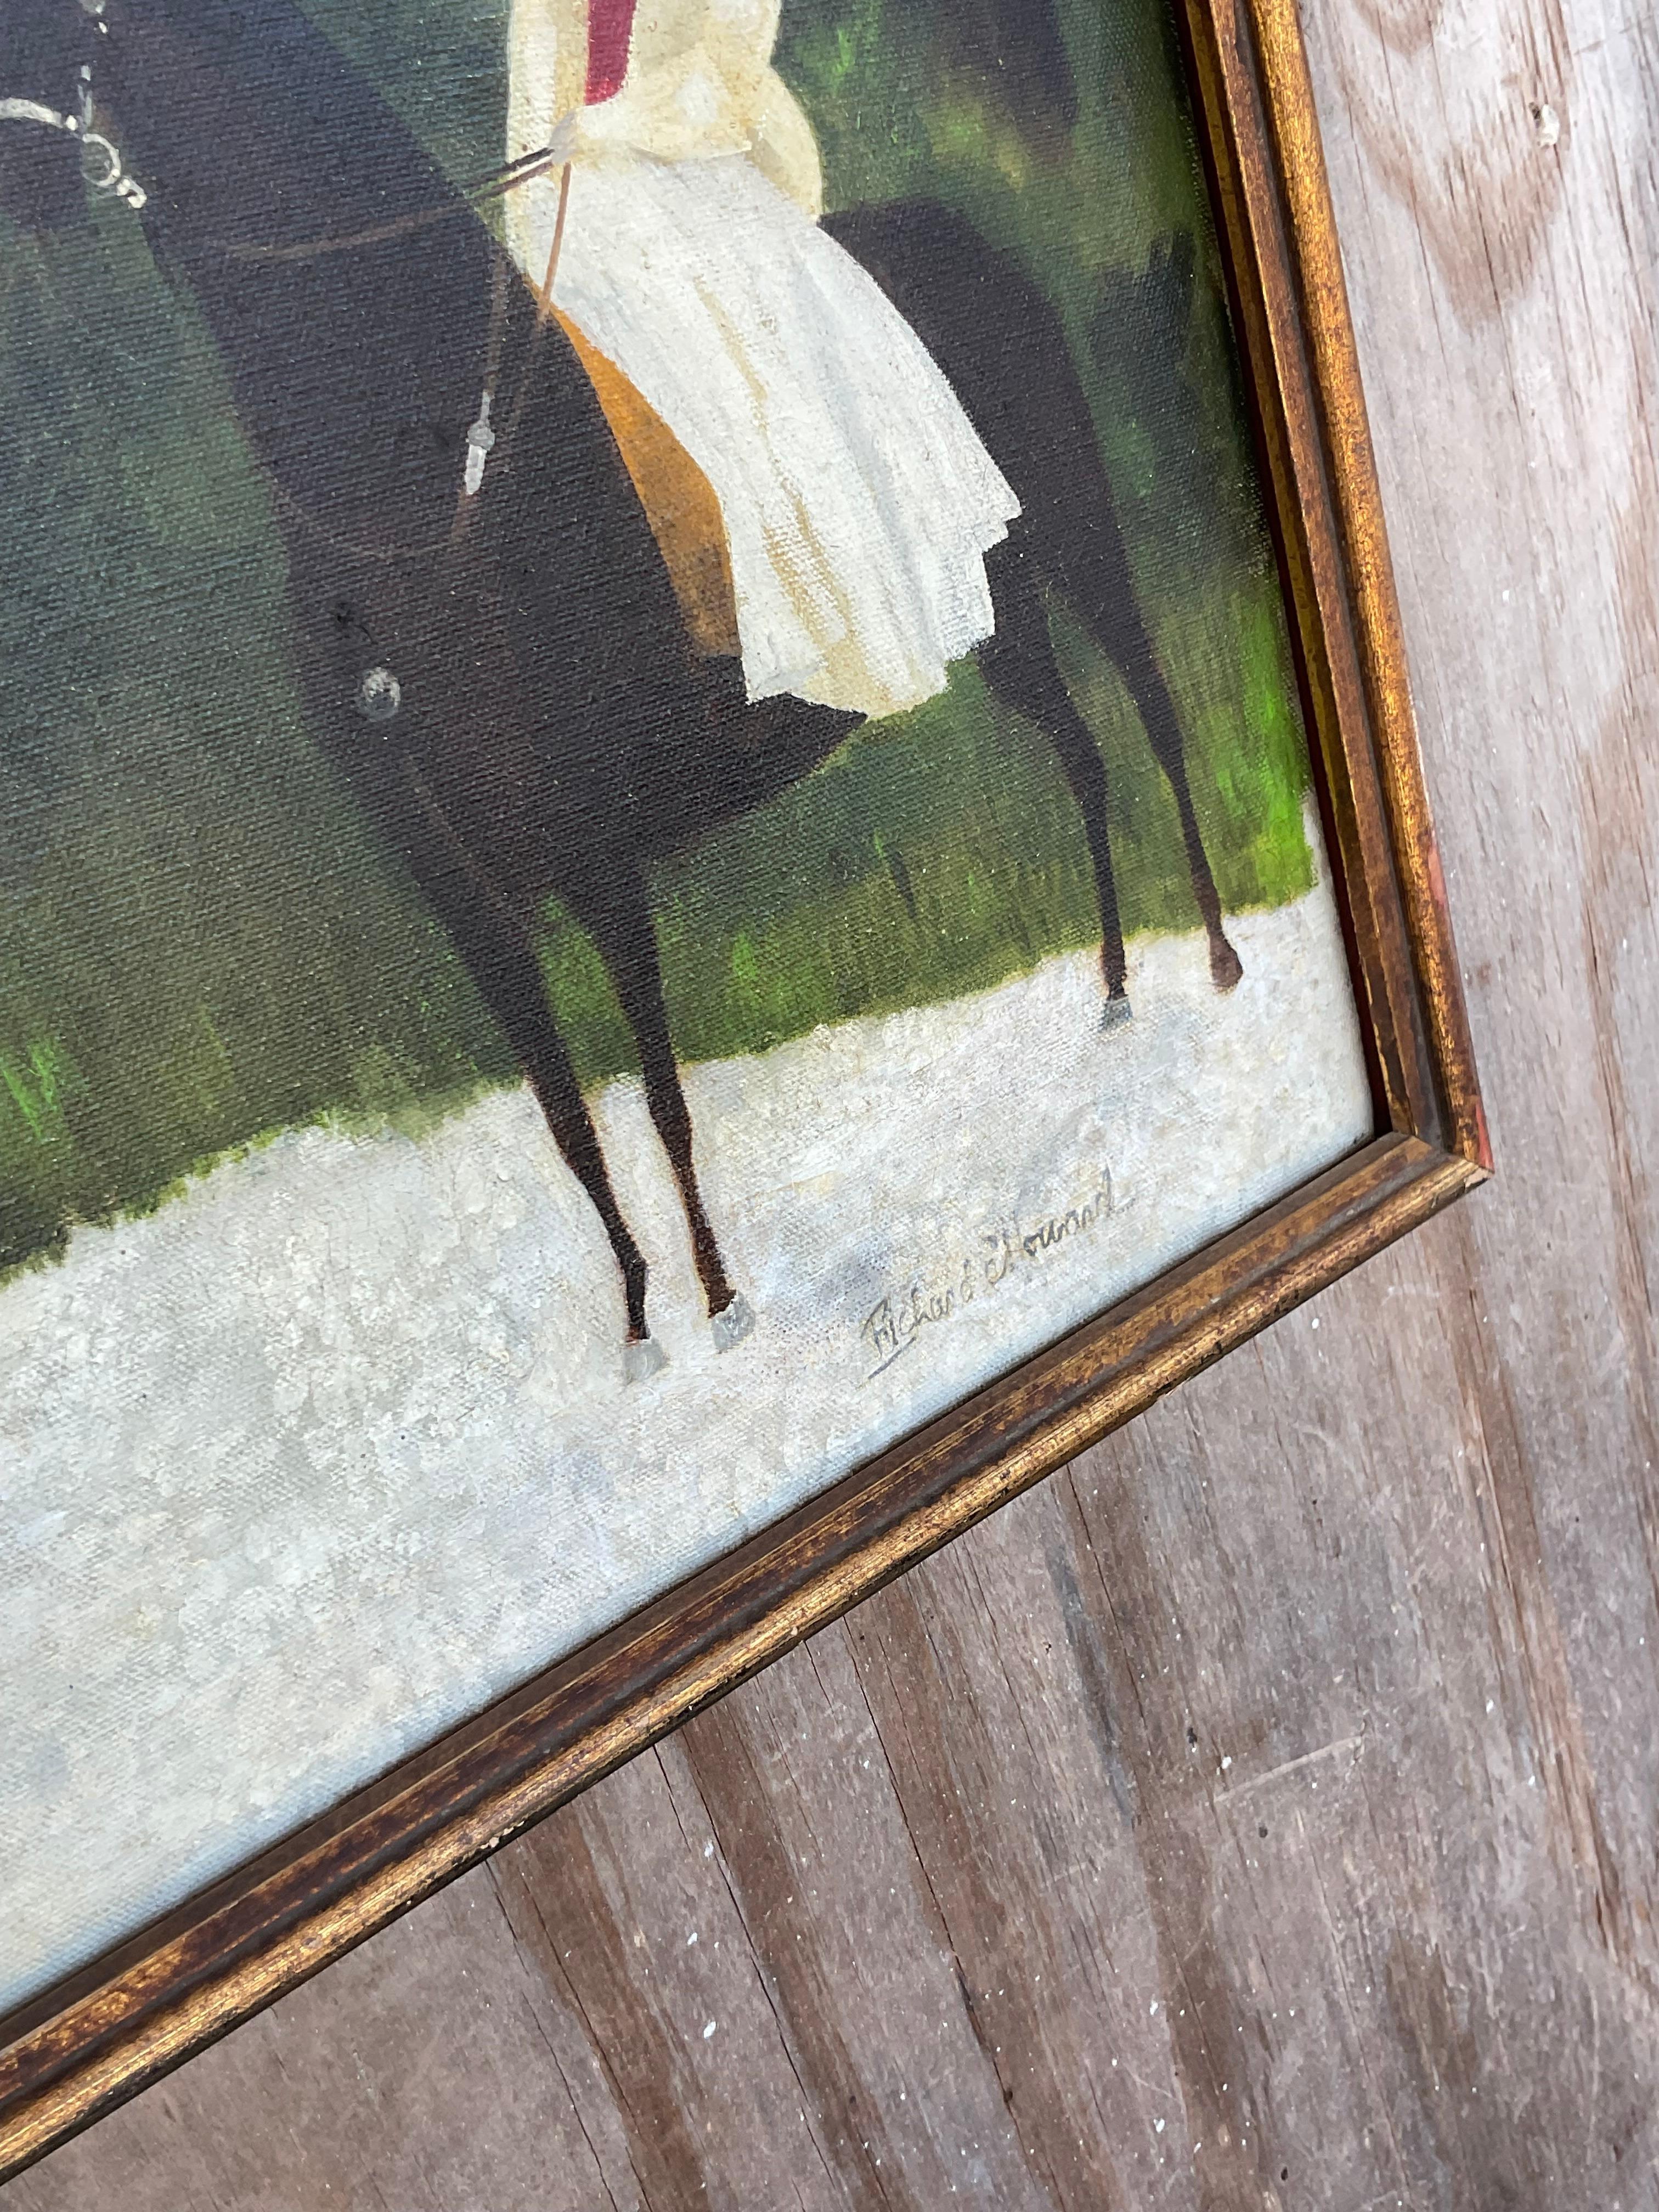 Vintage Naive Figurative Original Oil Painting on Canvas of a Royal Family In Good Condition For Sale In west palm beach, FL